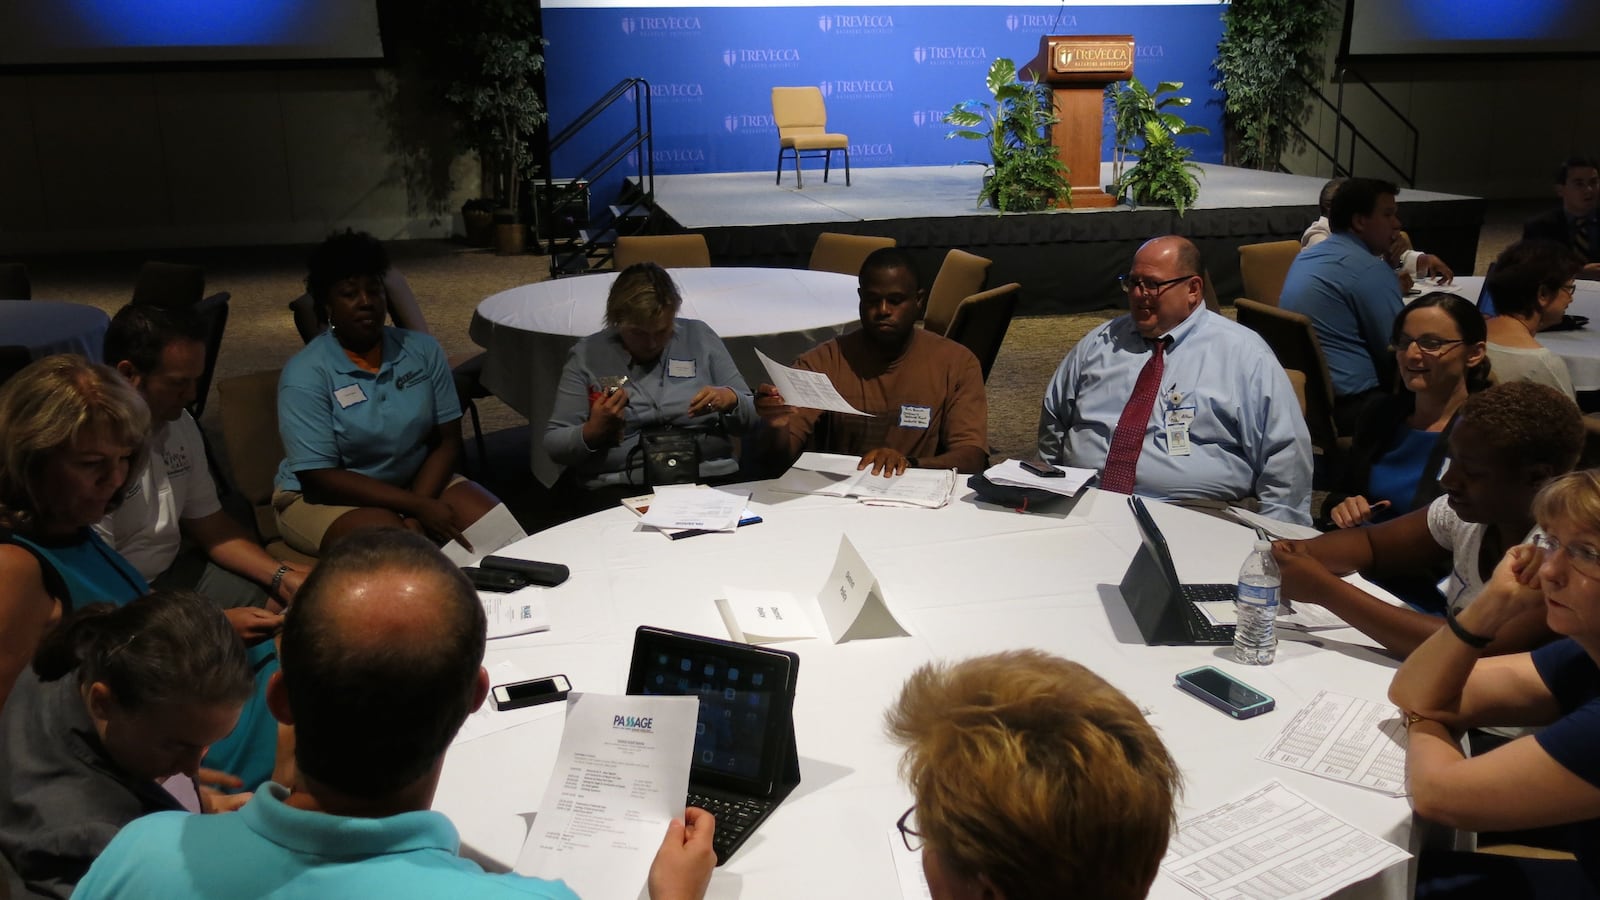 Tracy Bruno, a middle school principal in Nashville, leads a group discussion on school discipline as part of a new initiative to address racism in Metro Nashville Schools.